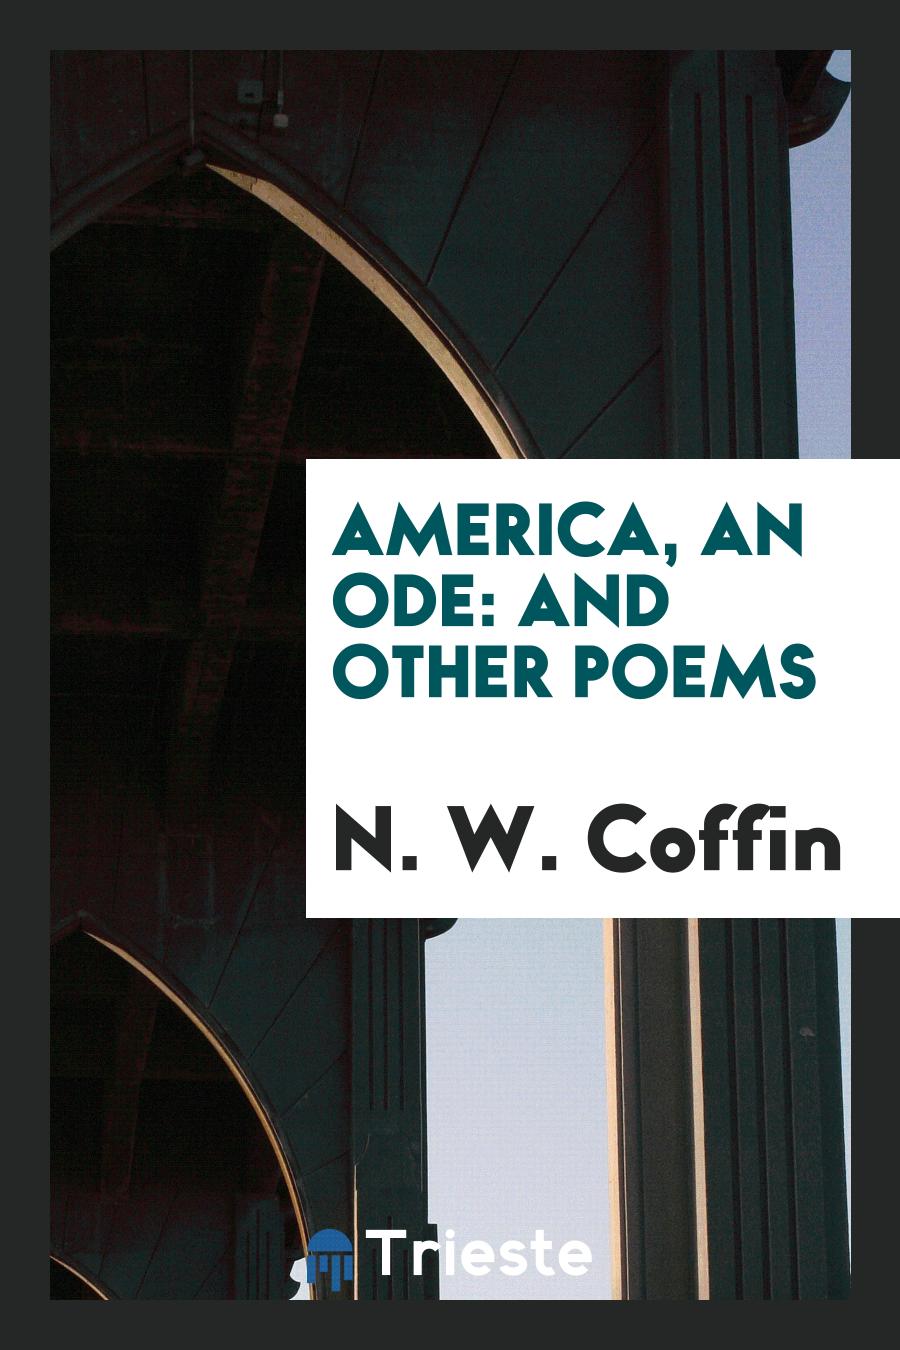 America, an Ode: And Other Poems